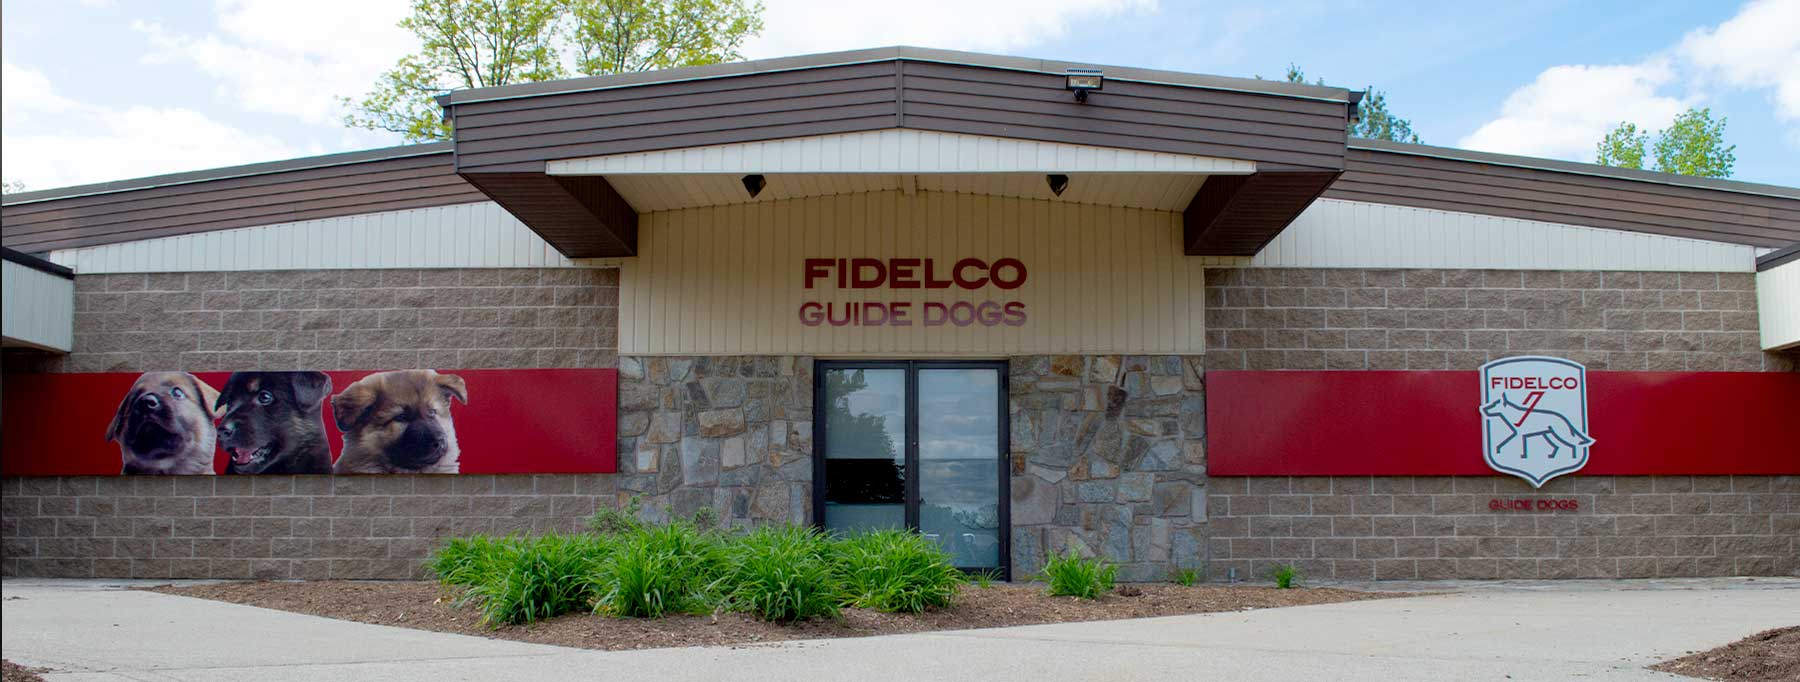 Fidelco Guide Dog signage on exterior of their office building 